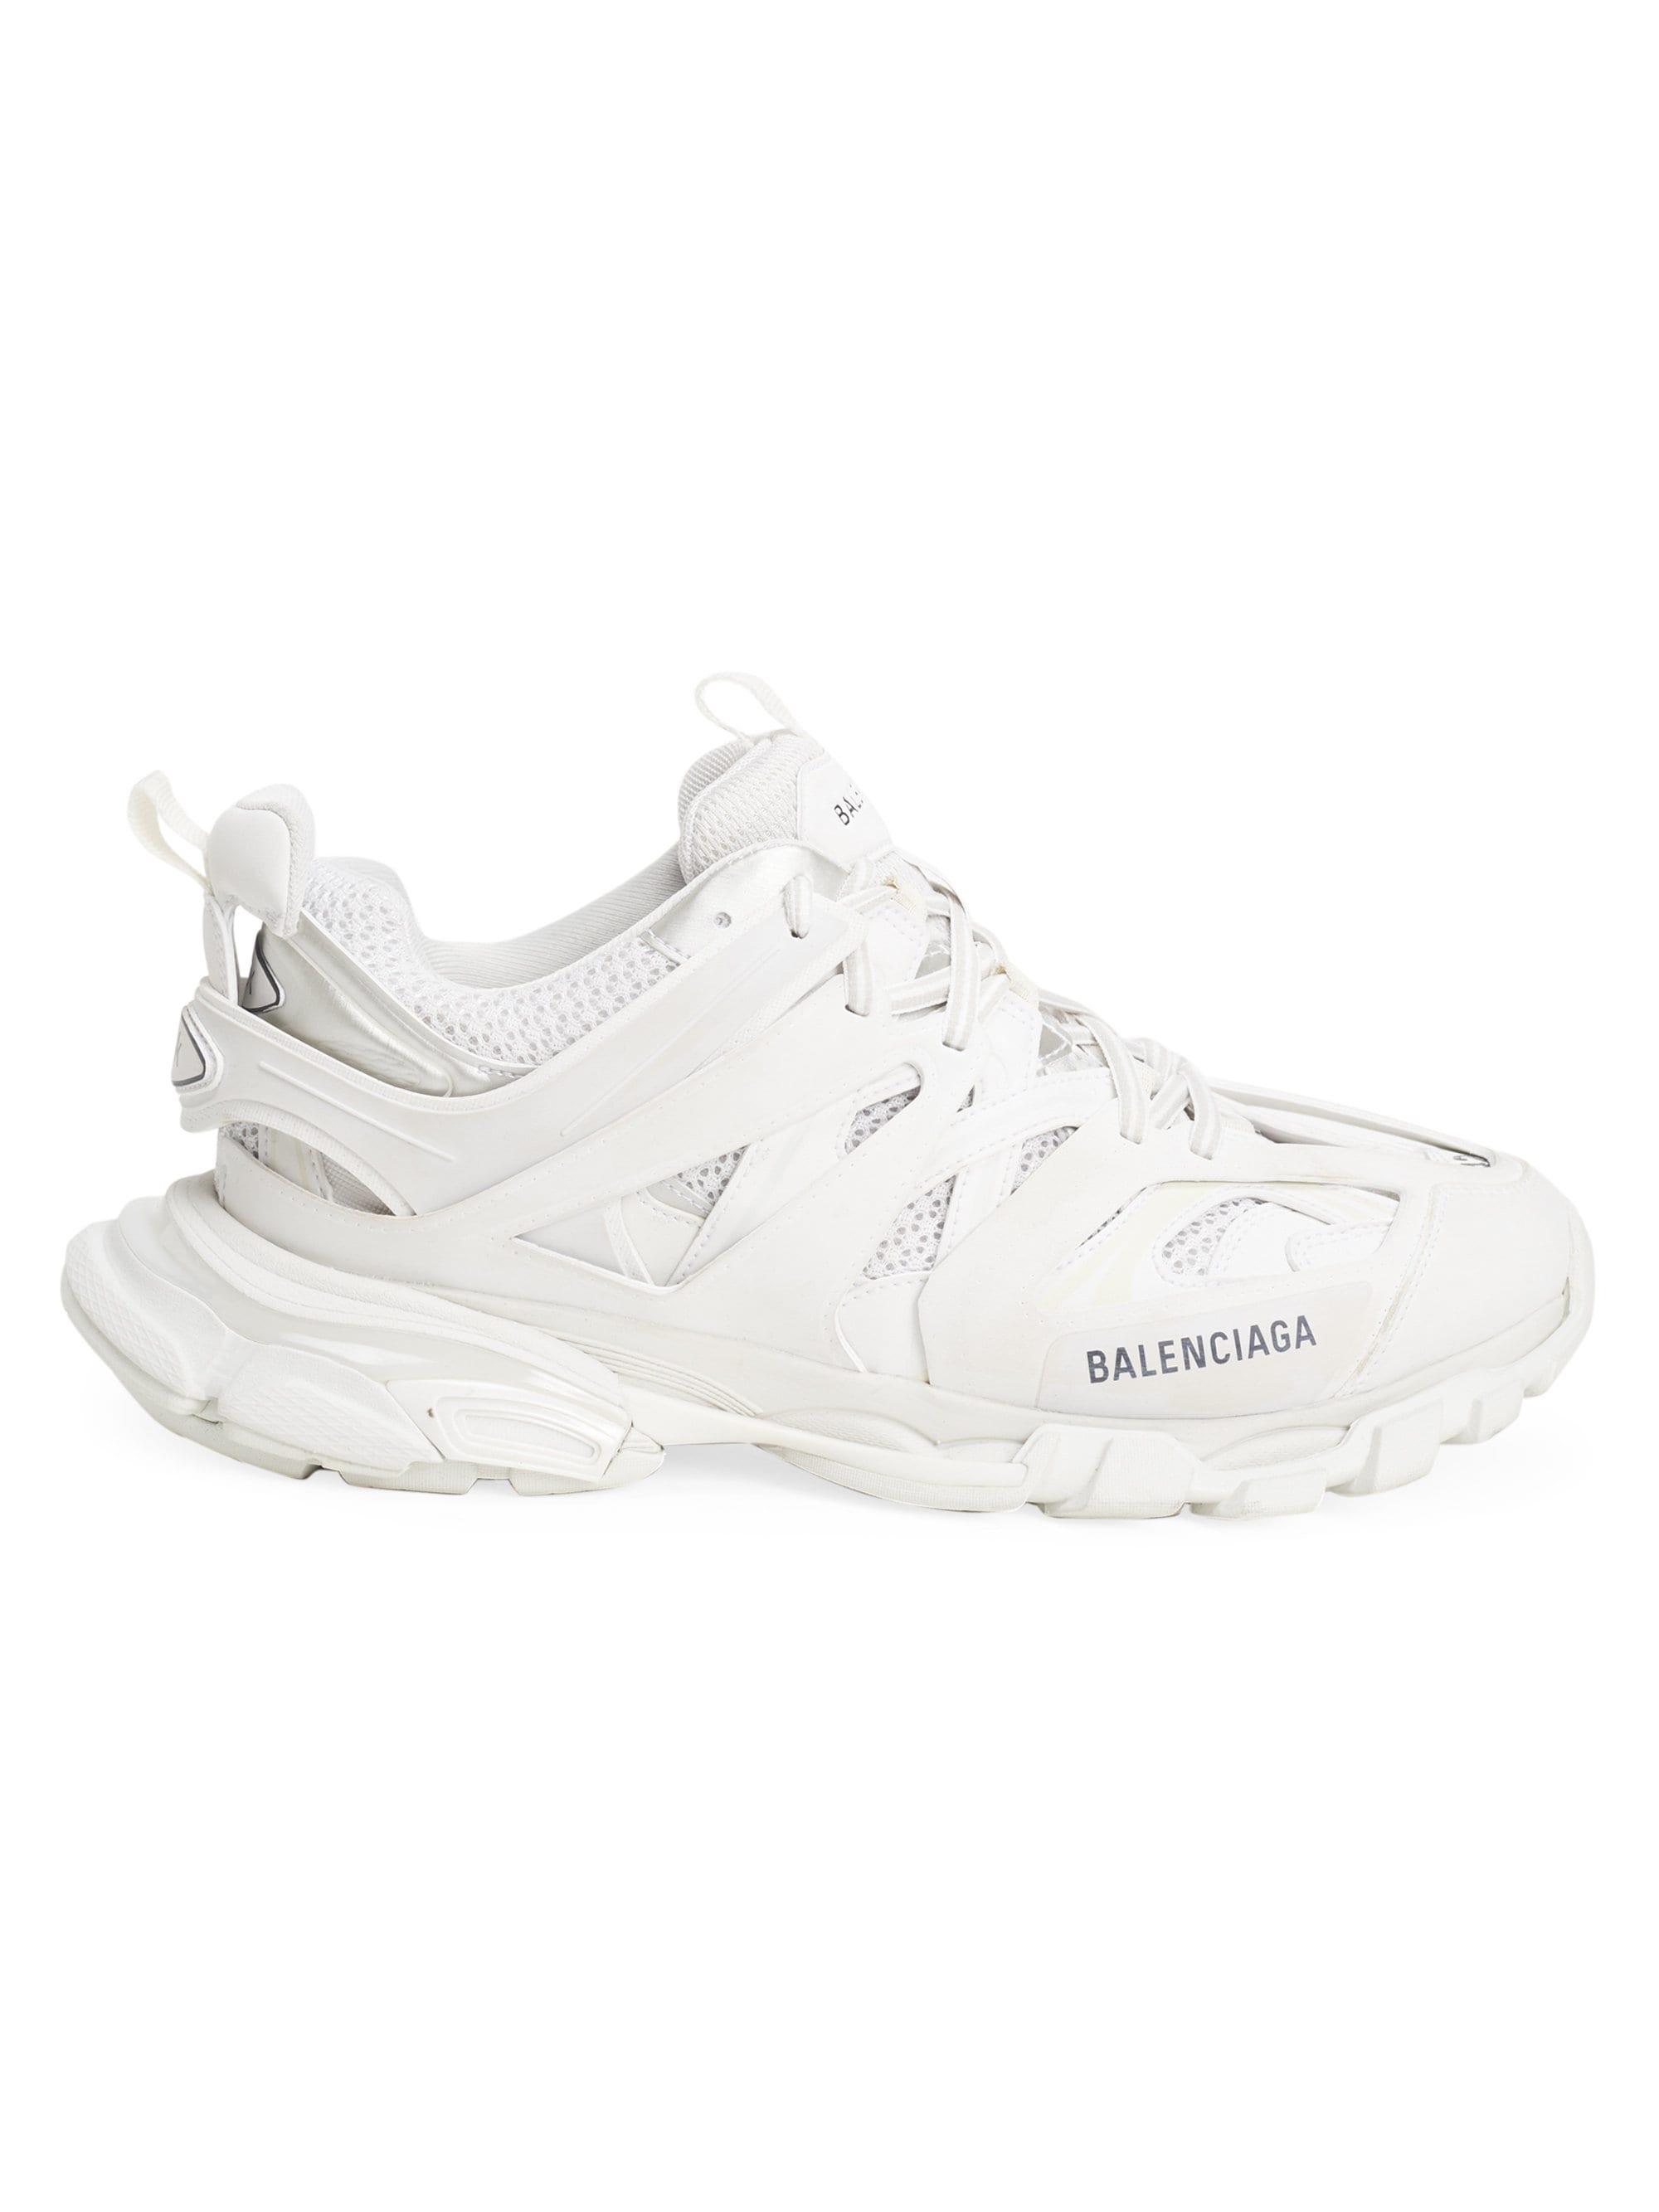 Balenciaga Leather Track Low-top Sneakers in White for Men - Lyst